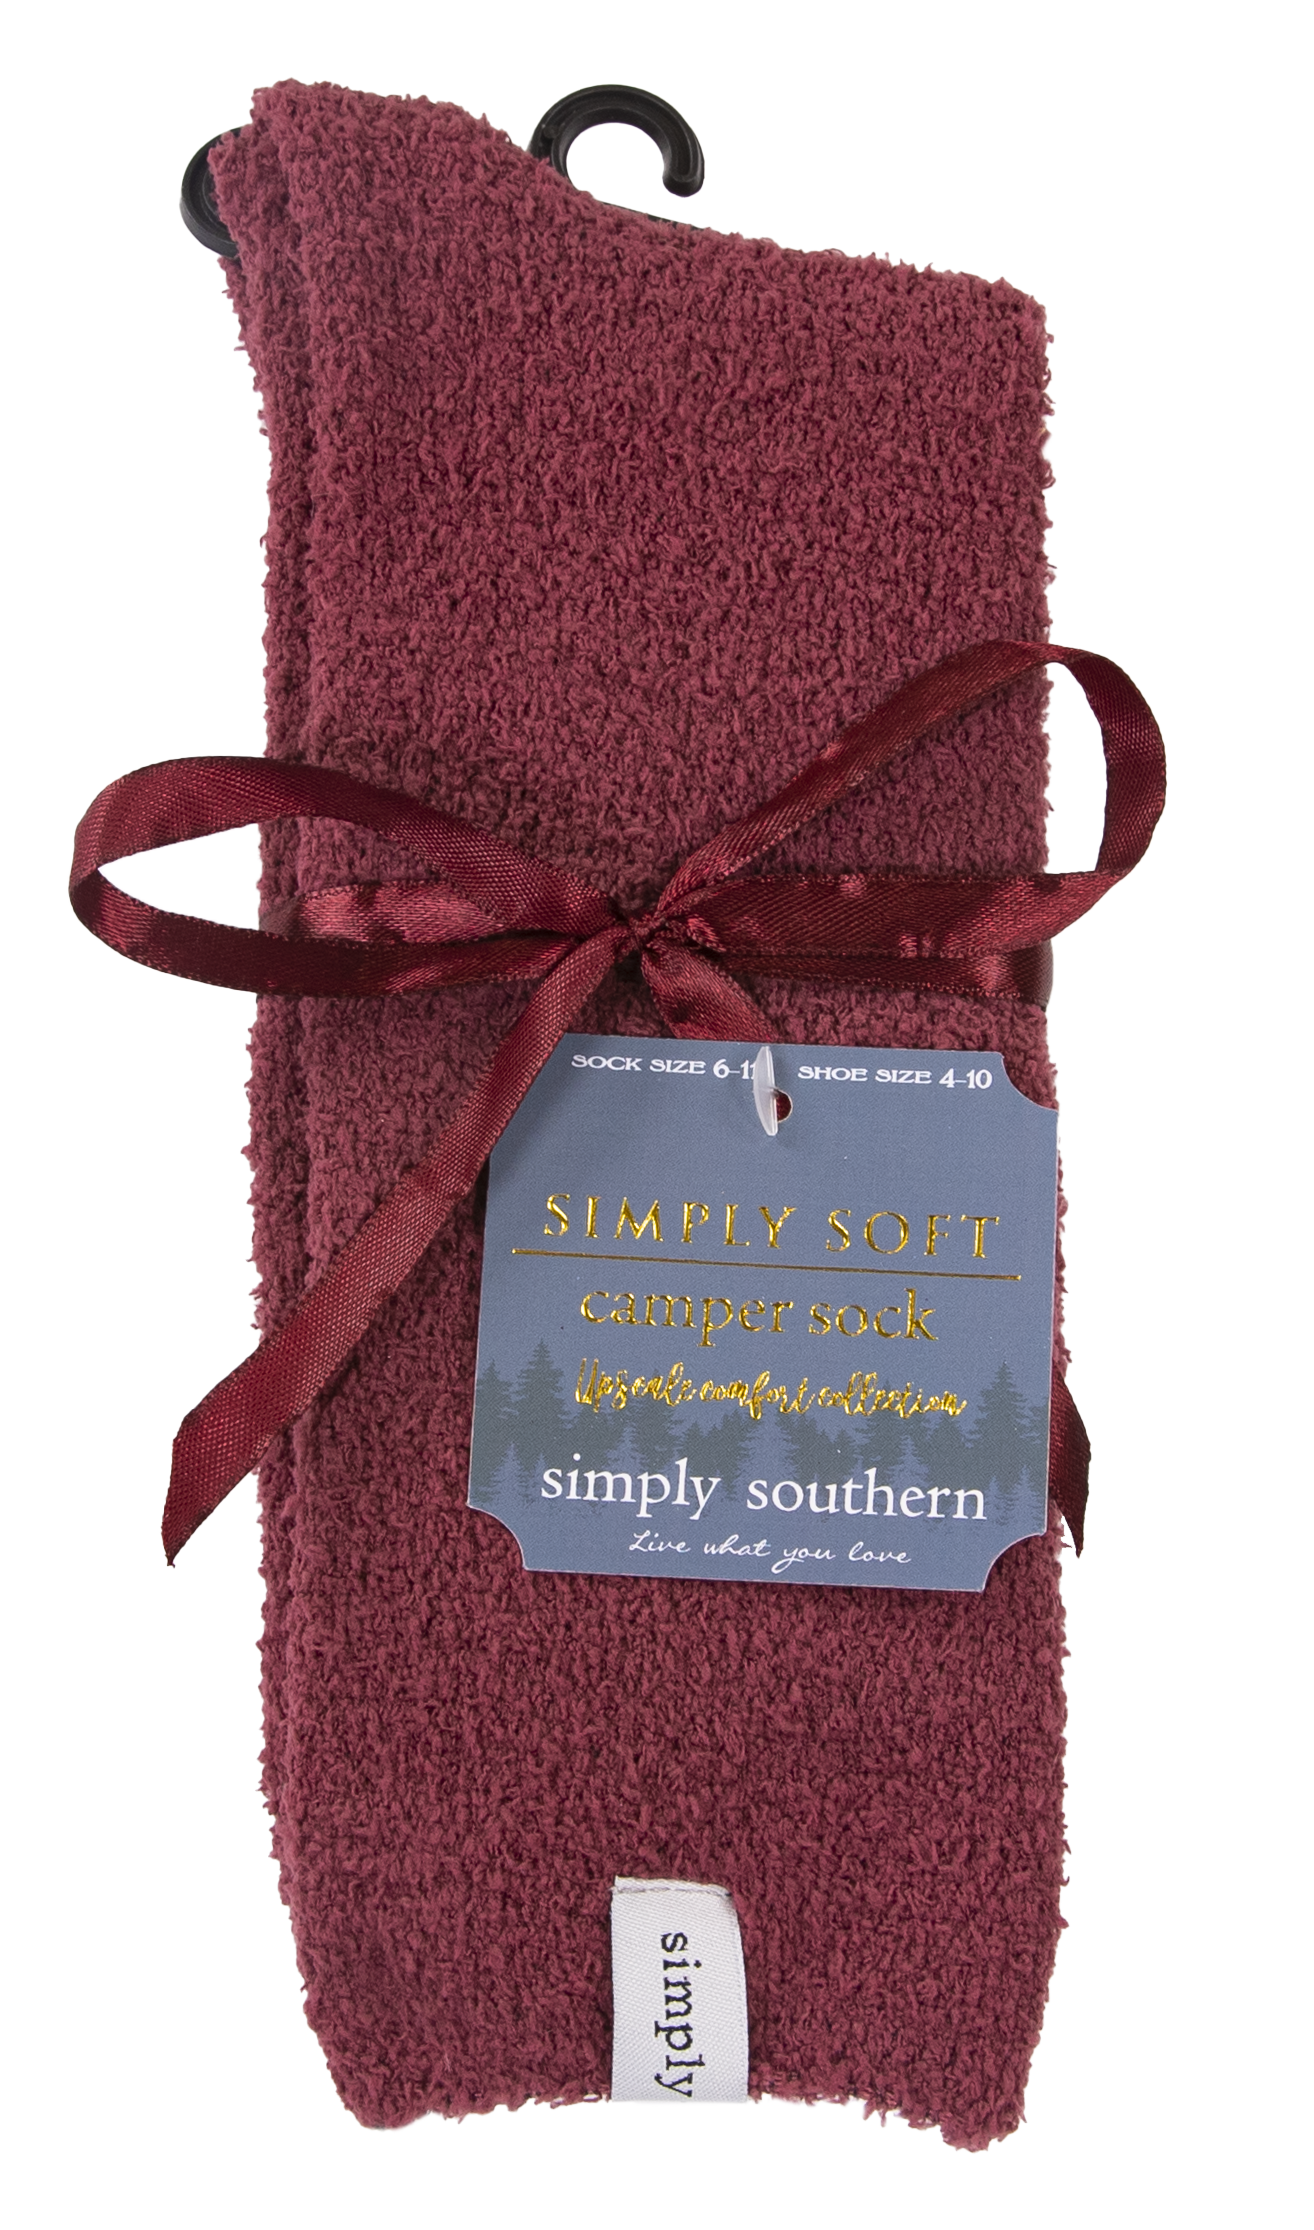 Simply Southern Soft Socks- Solid Maroon